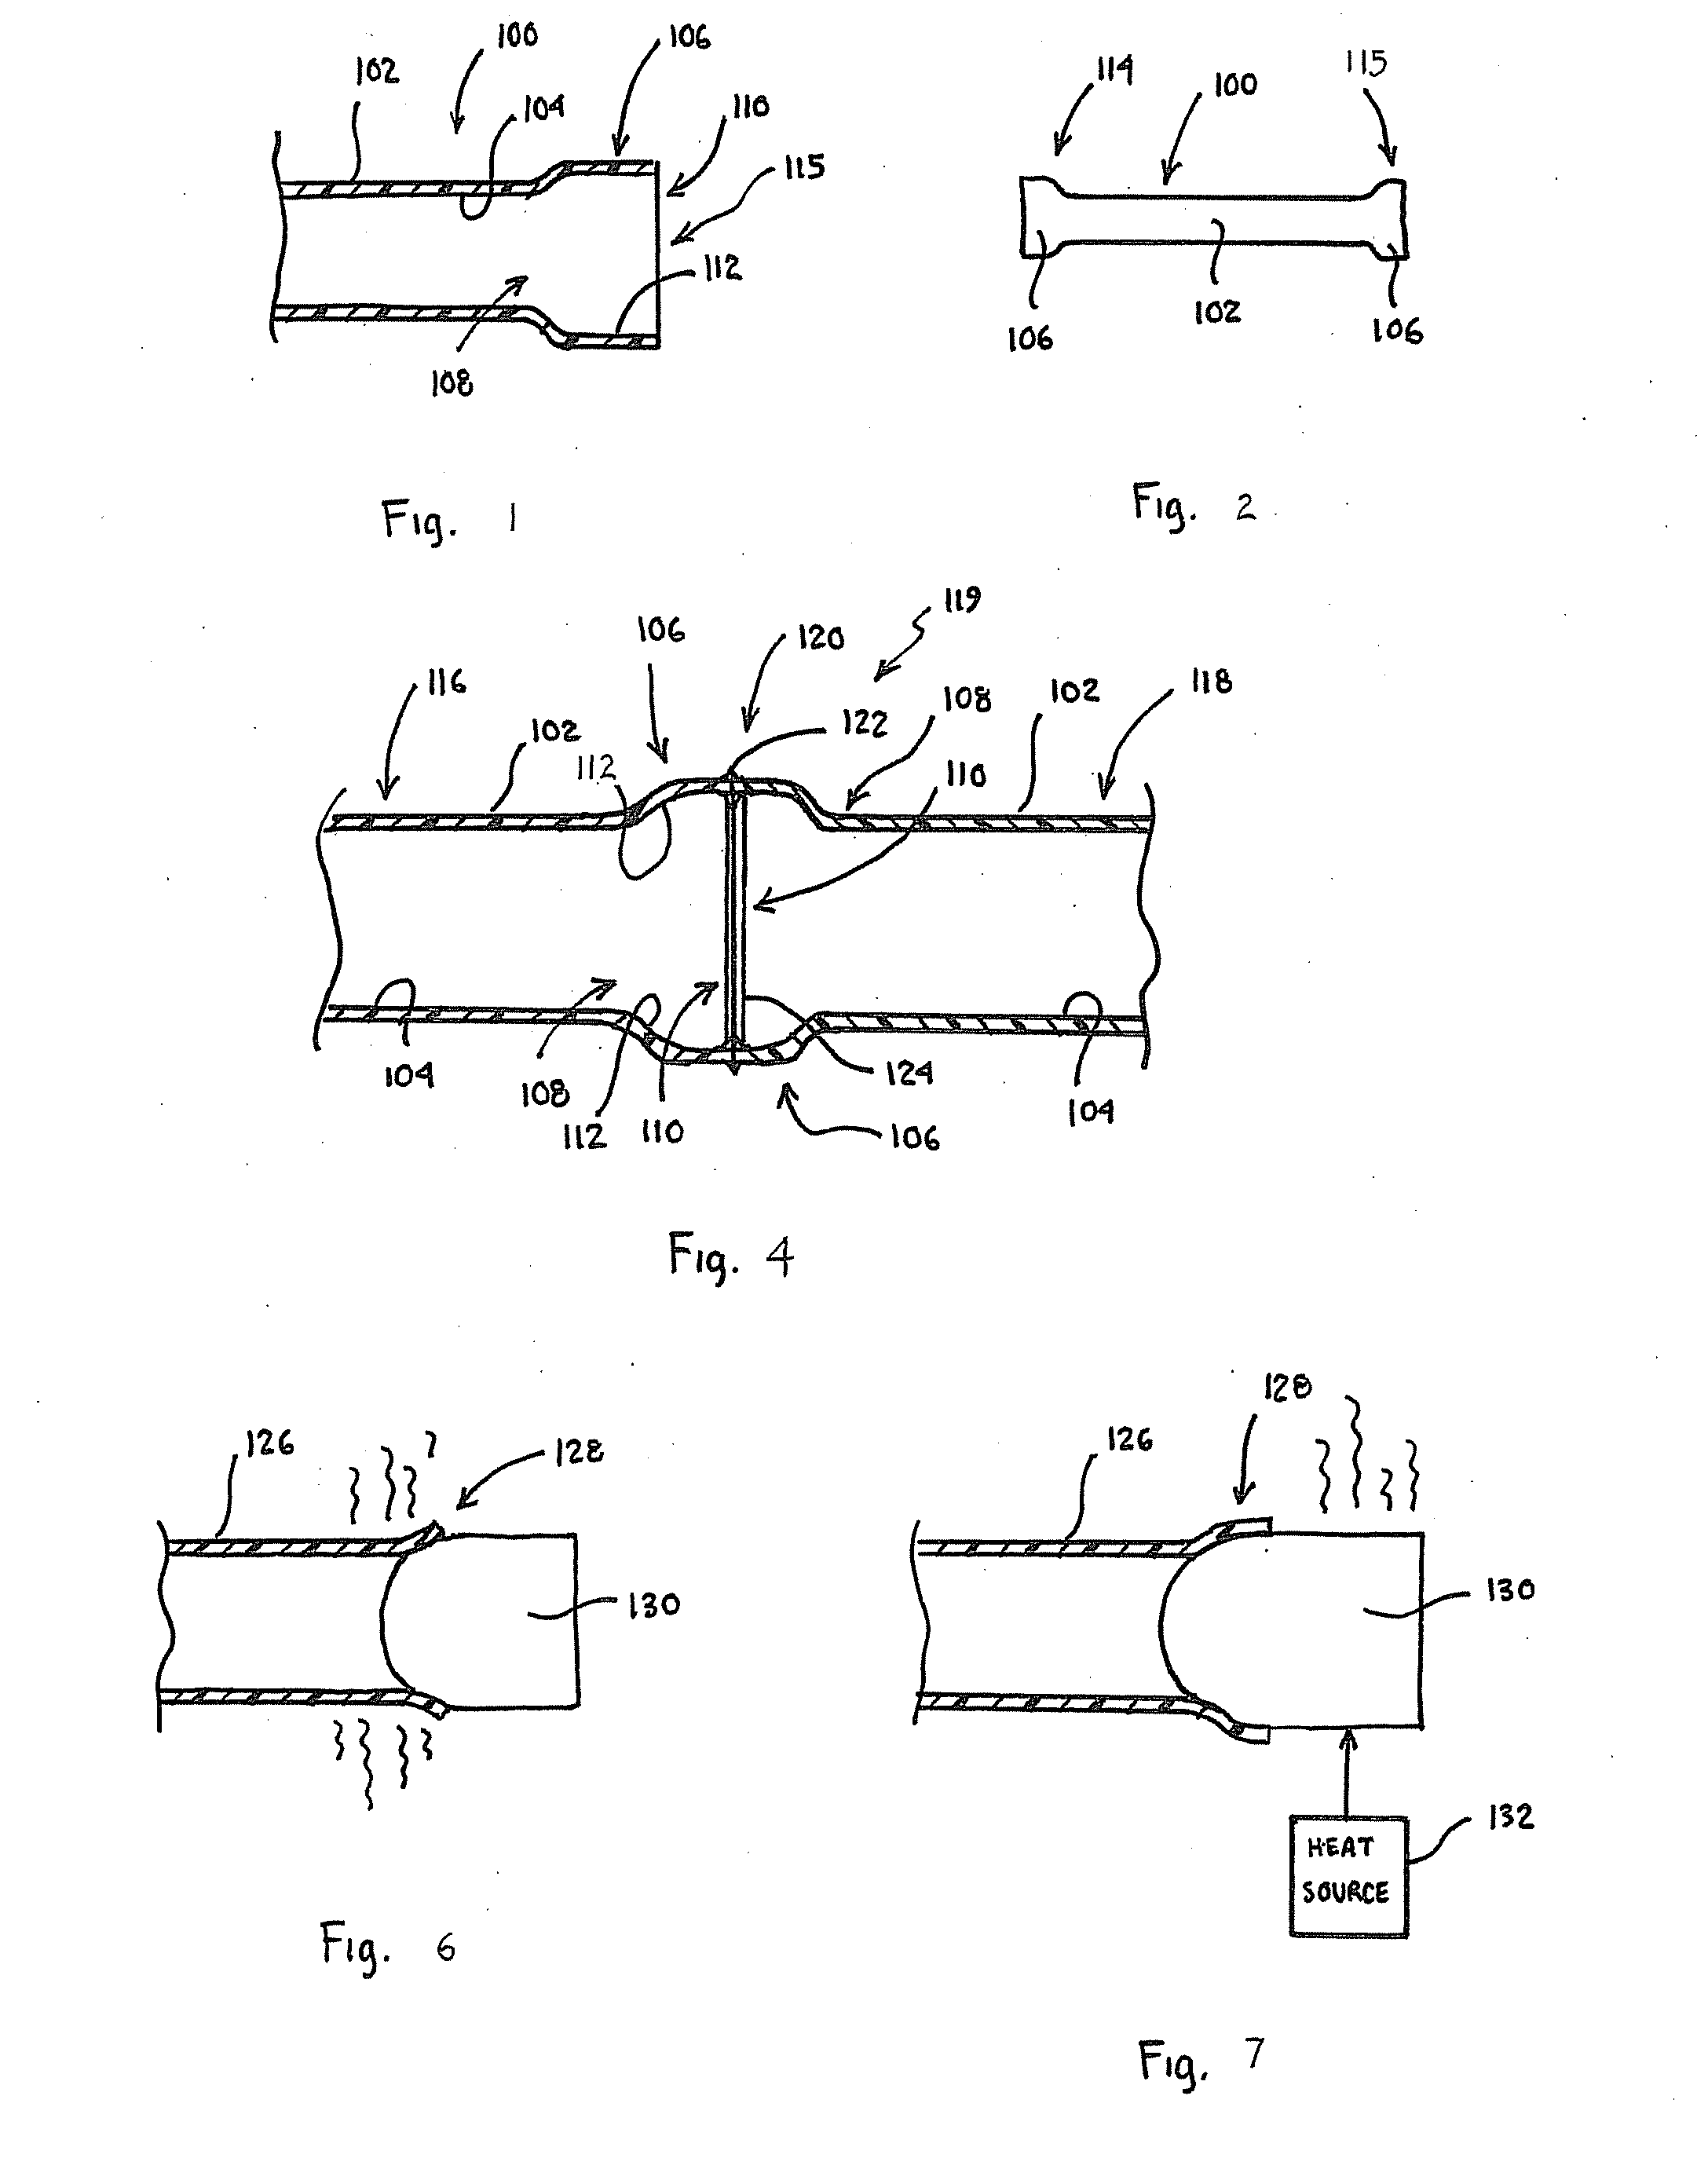 Conduit, manufacture thereof and fusion process therefor